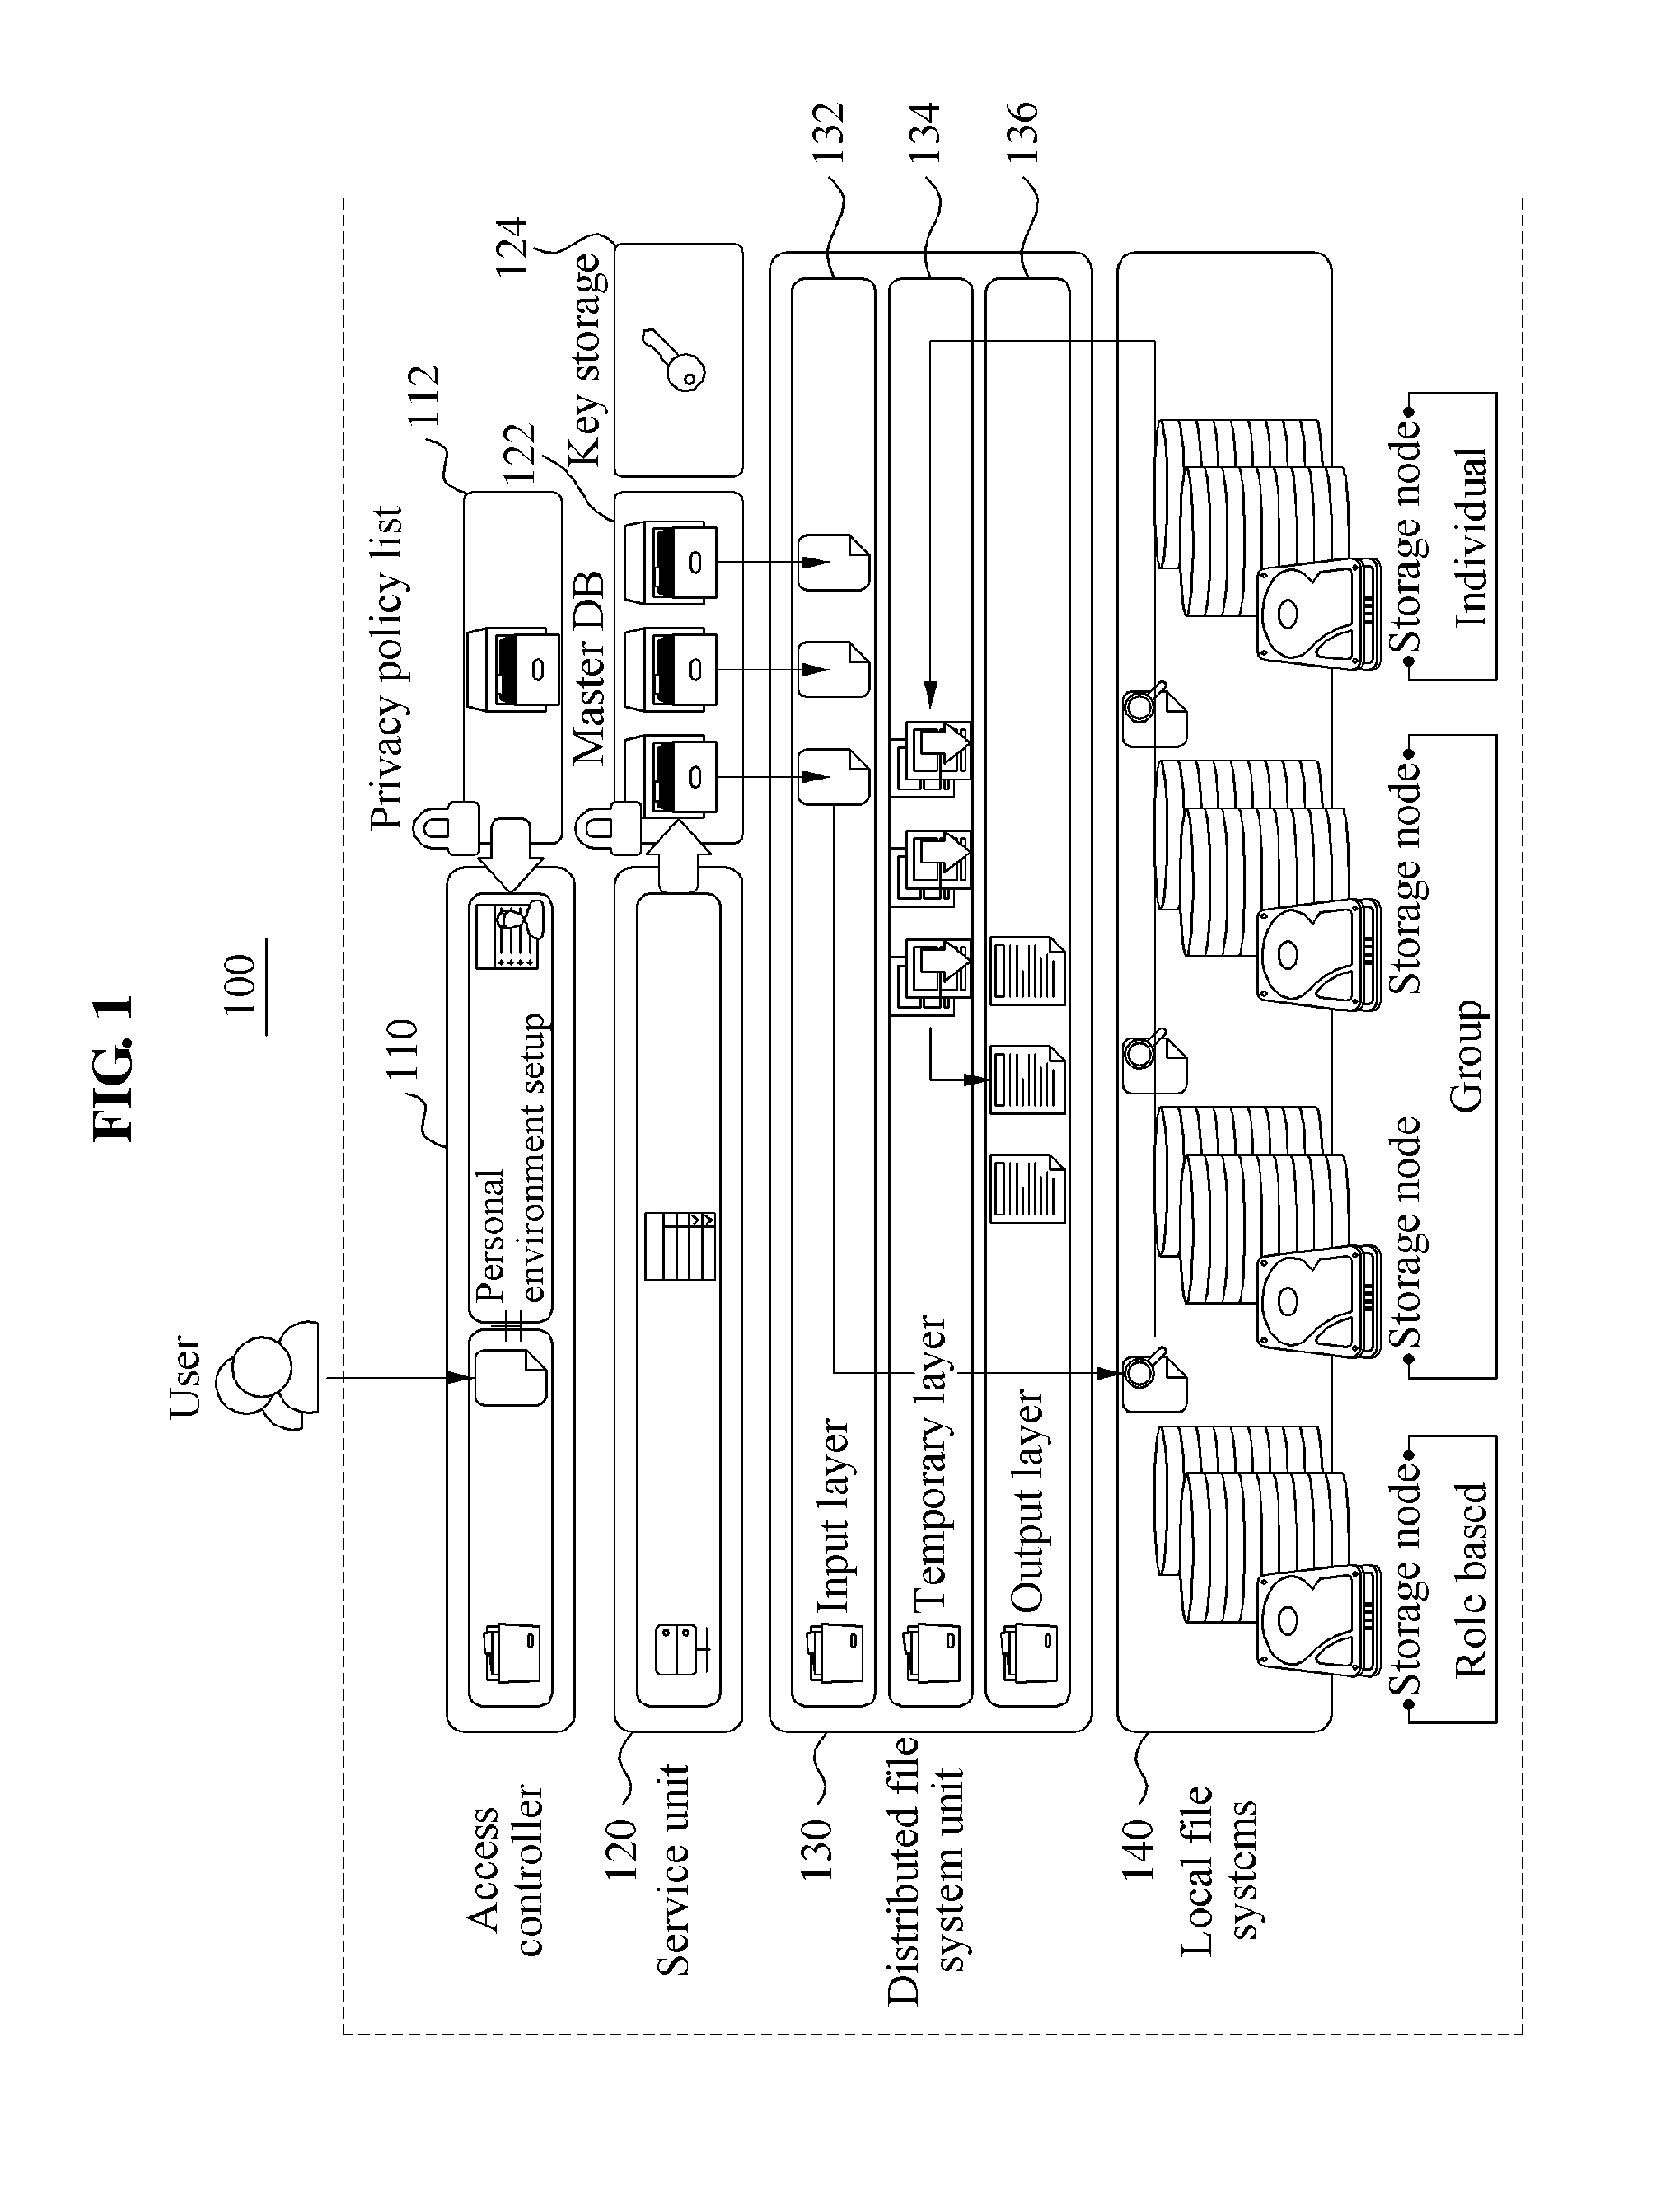 Method and apparatus for providing data sharing